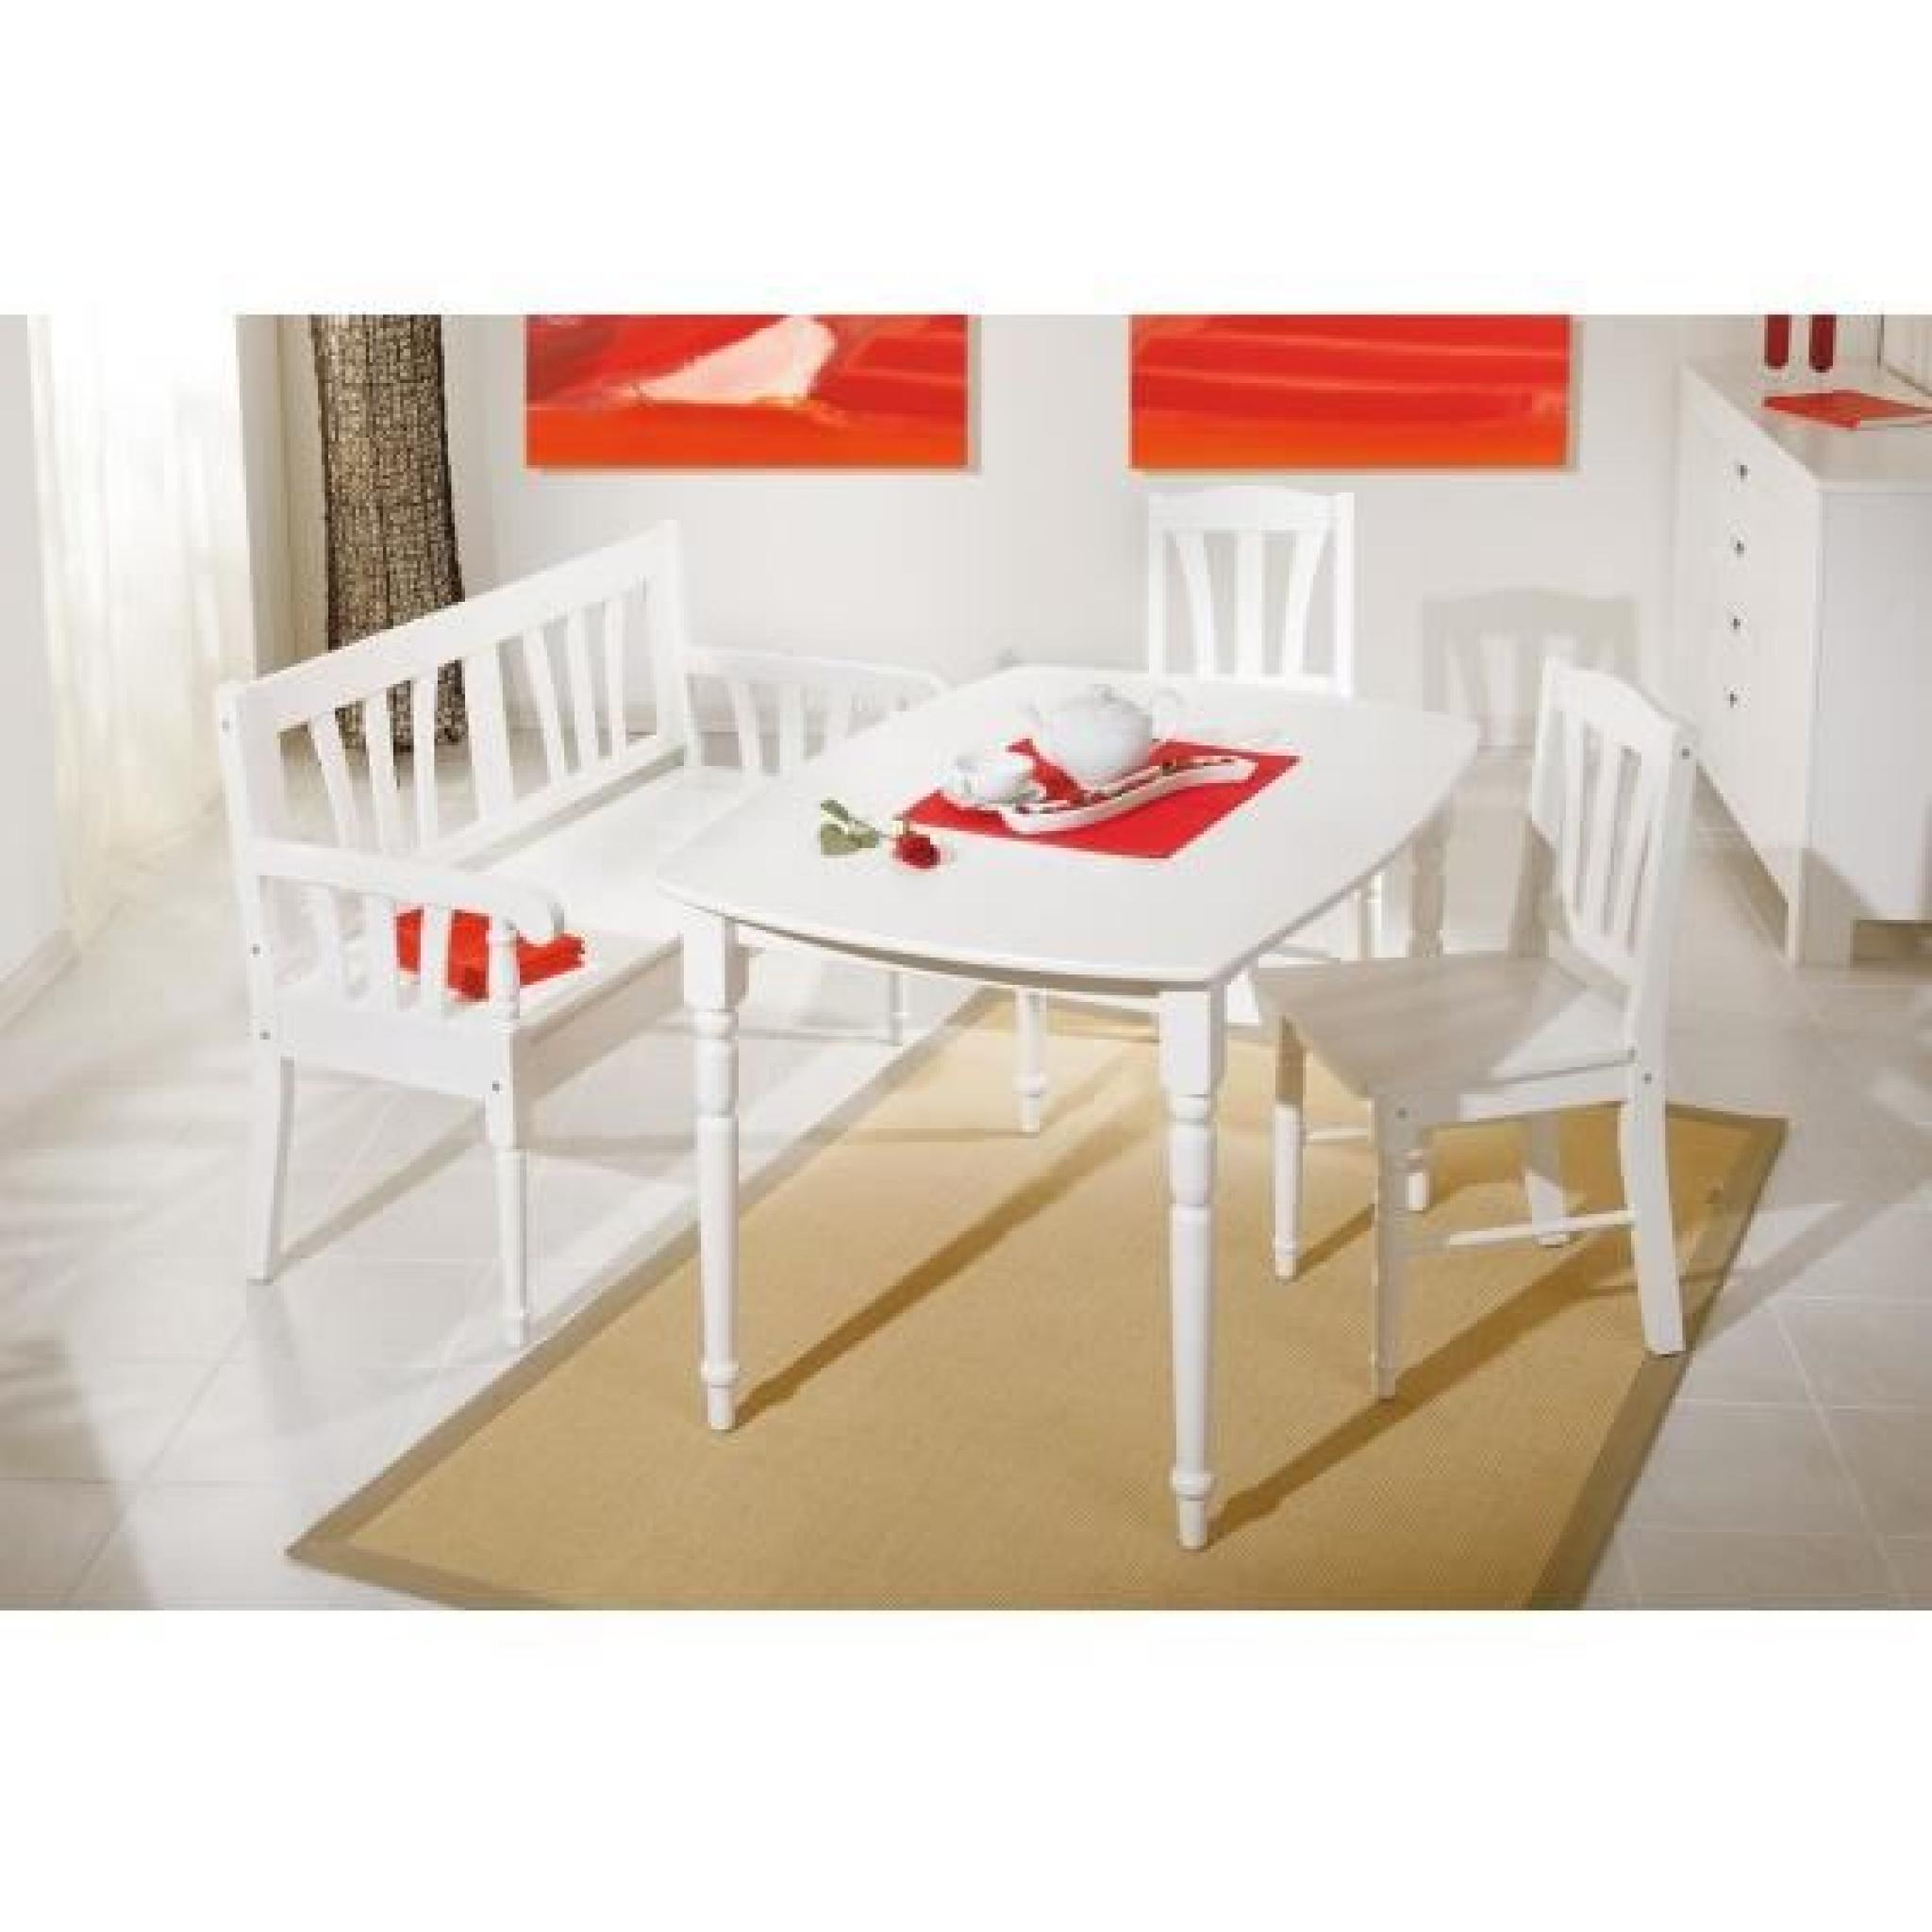 Sonia - Table rectangulaire pas cher